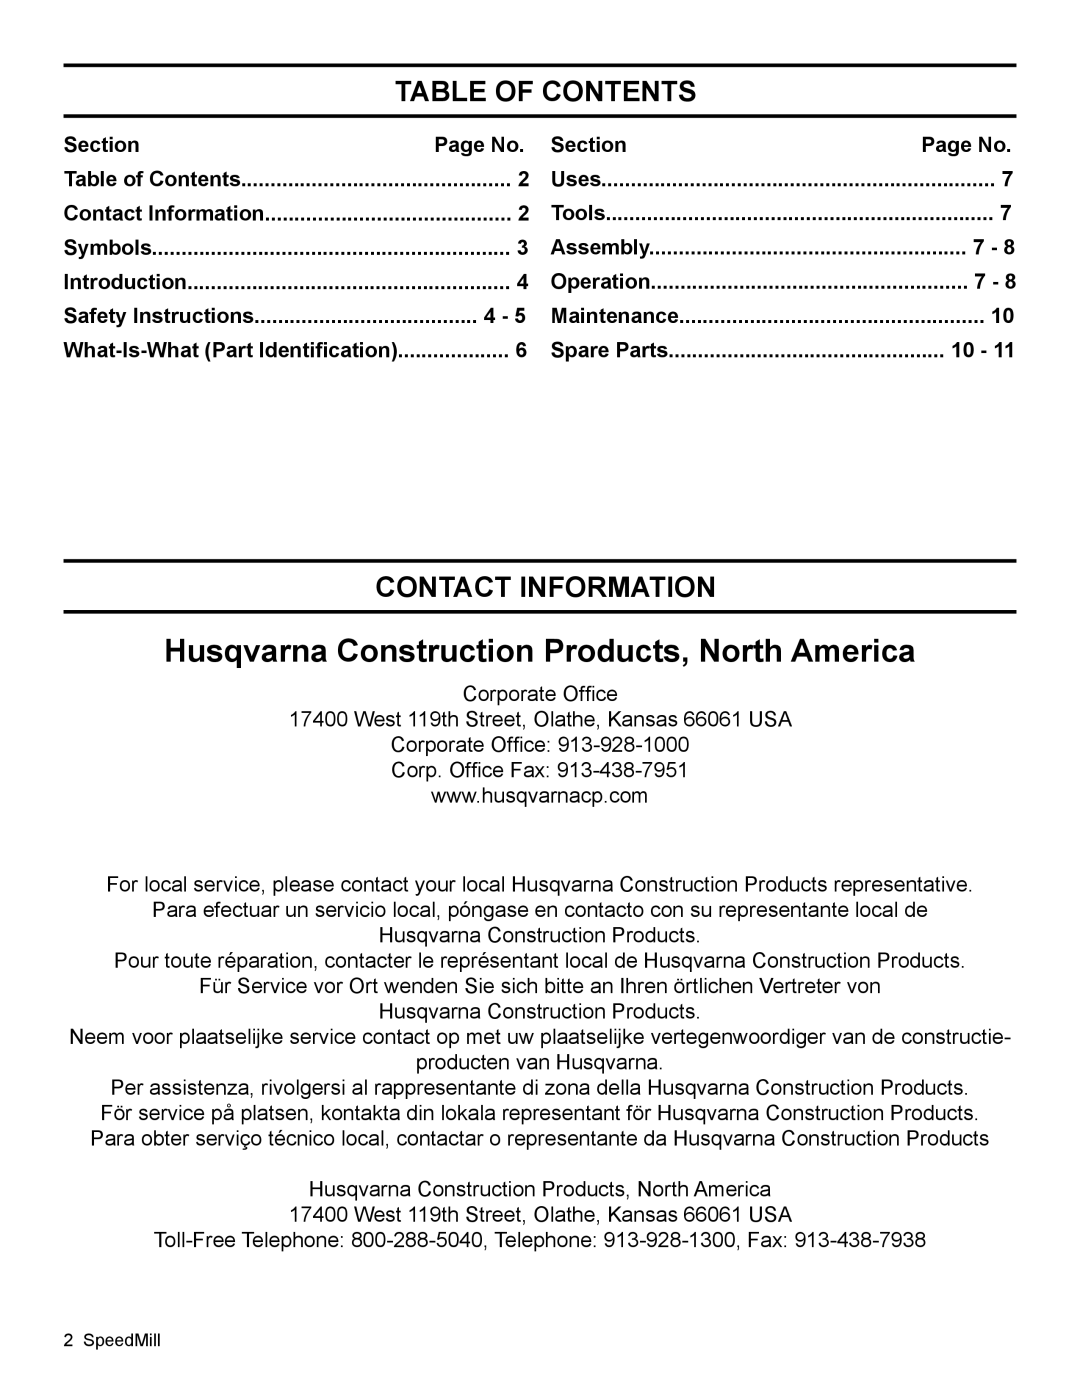 Husqvarna K 750 manual Table Of Contents, Contact Information, Section, Spare Parts 